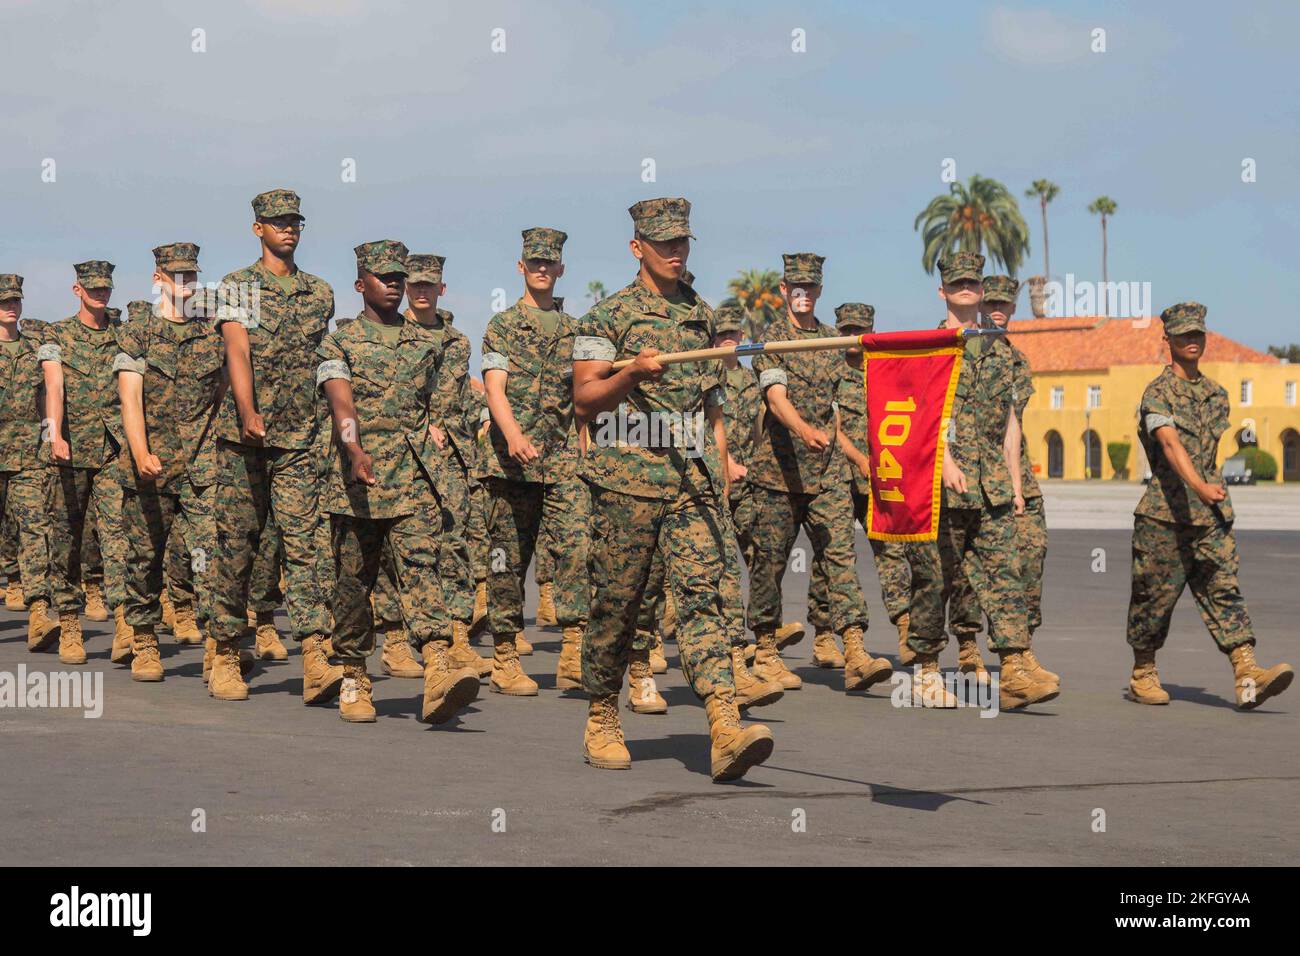 Marine Corps Customs and Traditions